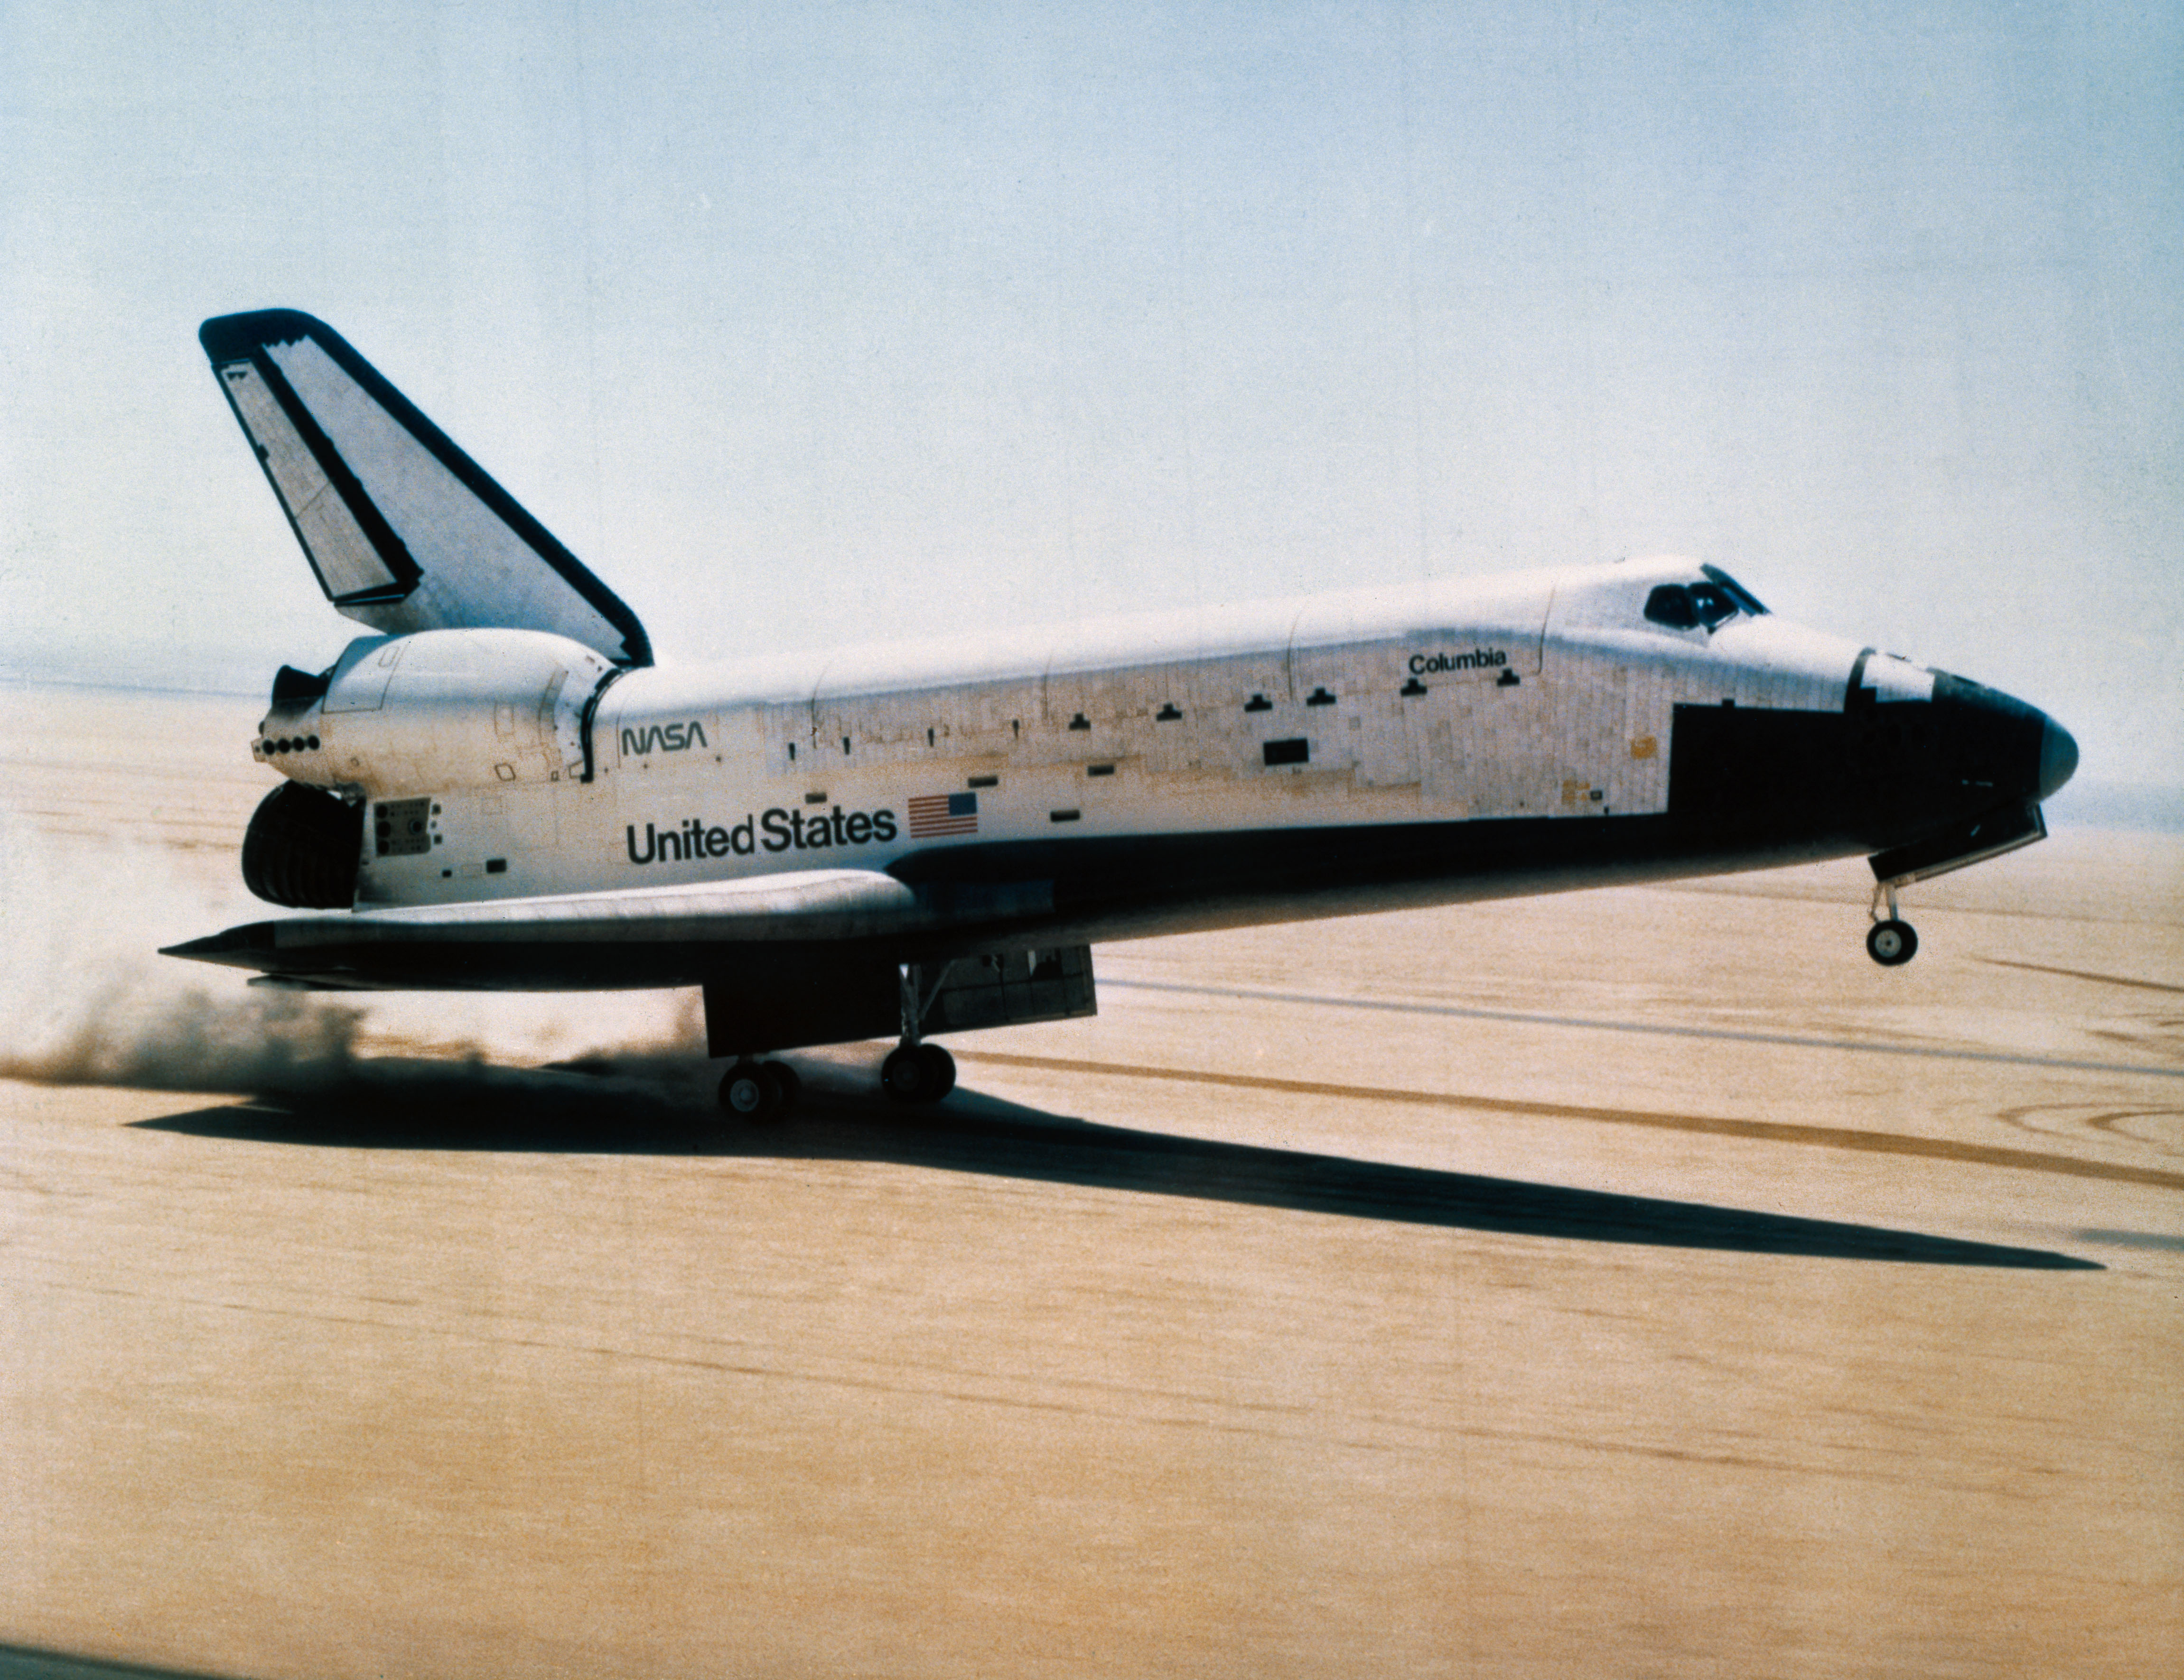 April 14, 1981, Landing of First Space Shuttle Mission | NASA